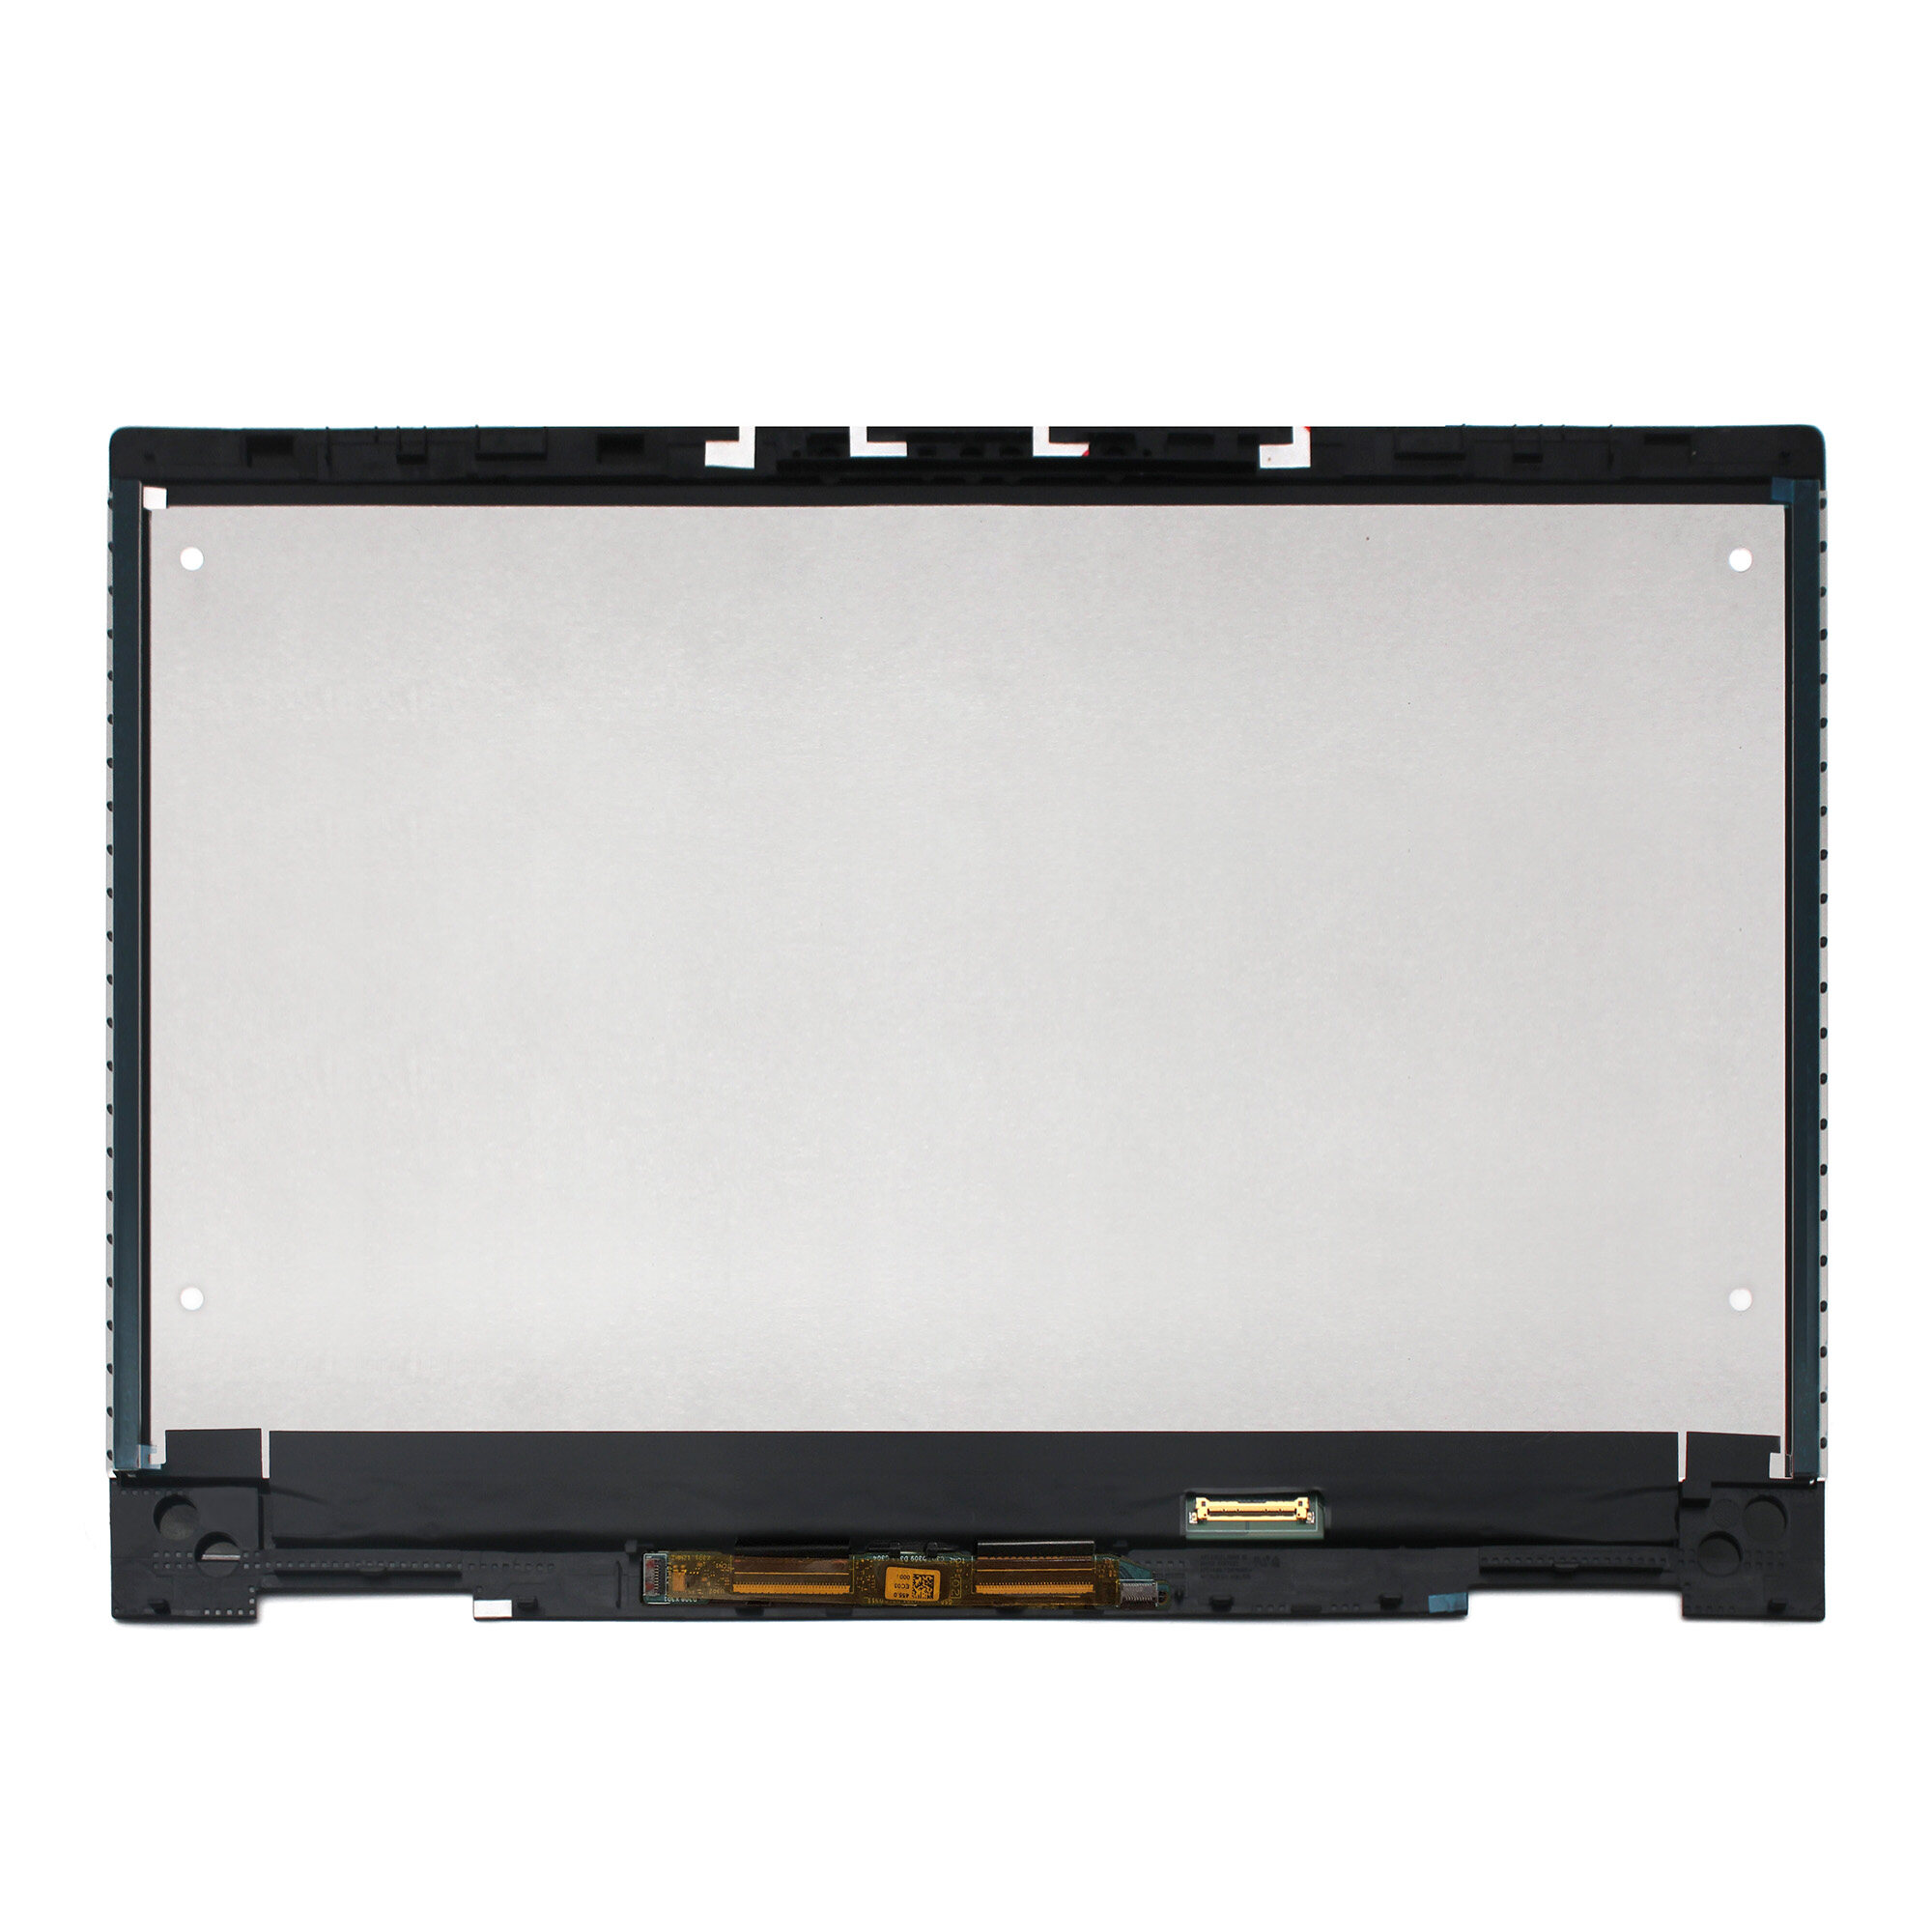 Kreplacement FHD LED LCD Display Touch Screen Digitizer Glass Panel Assembly For HP ENVY x360 13-ag0000nf 13-ag0001dx 13-ag0001na 13-ag0001ng